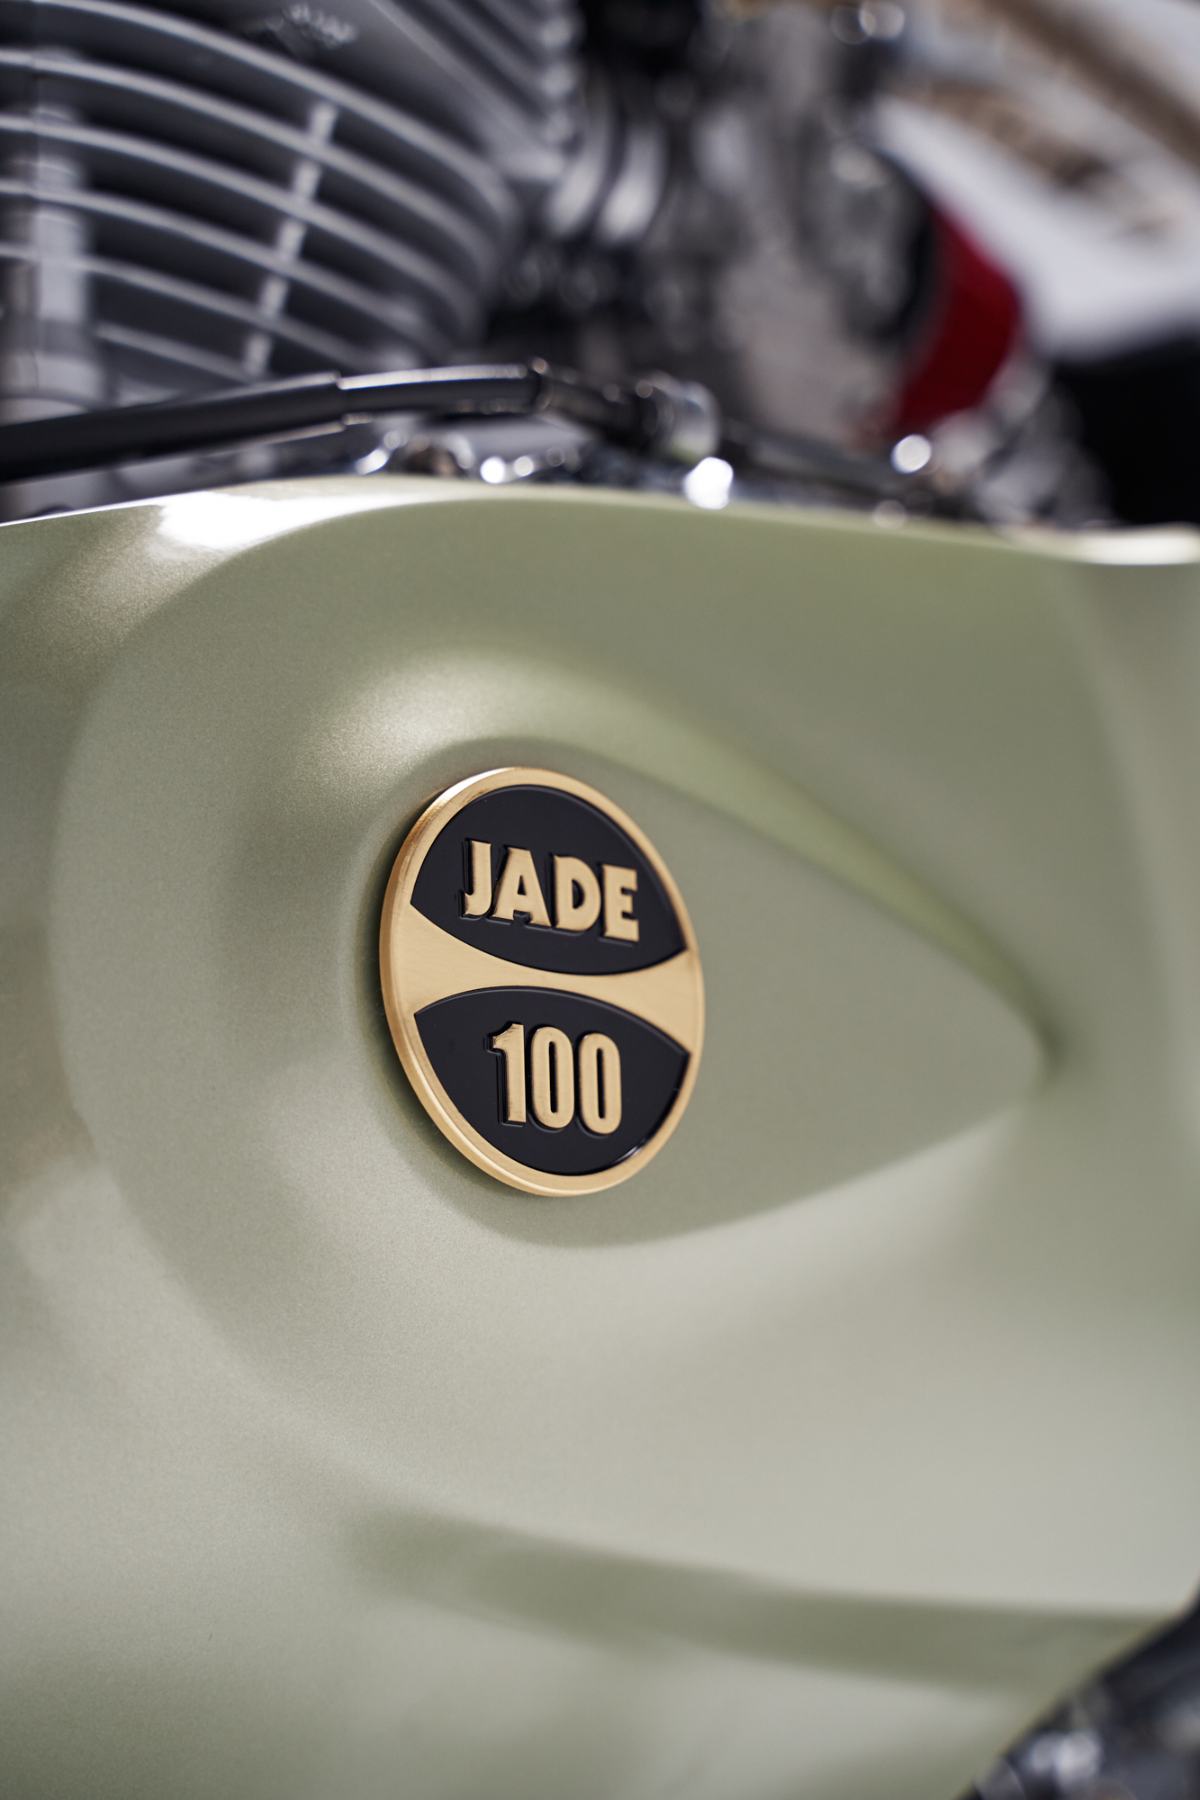 Jade by Tamarit Motorcycles - TheArsenale